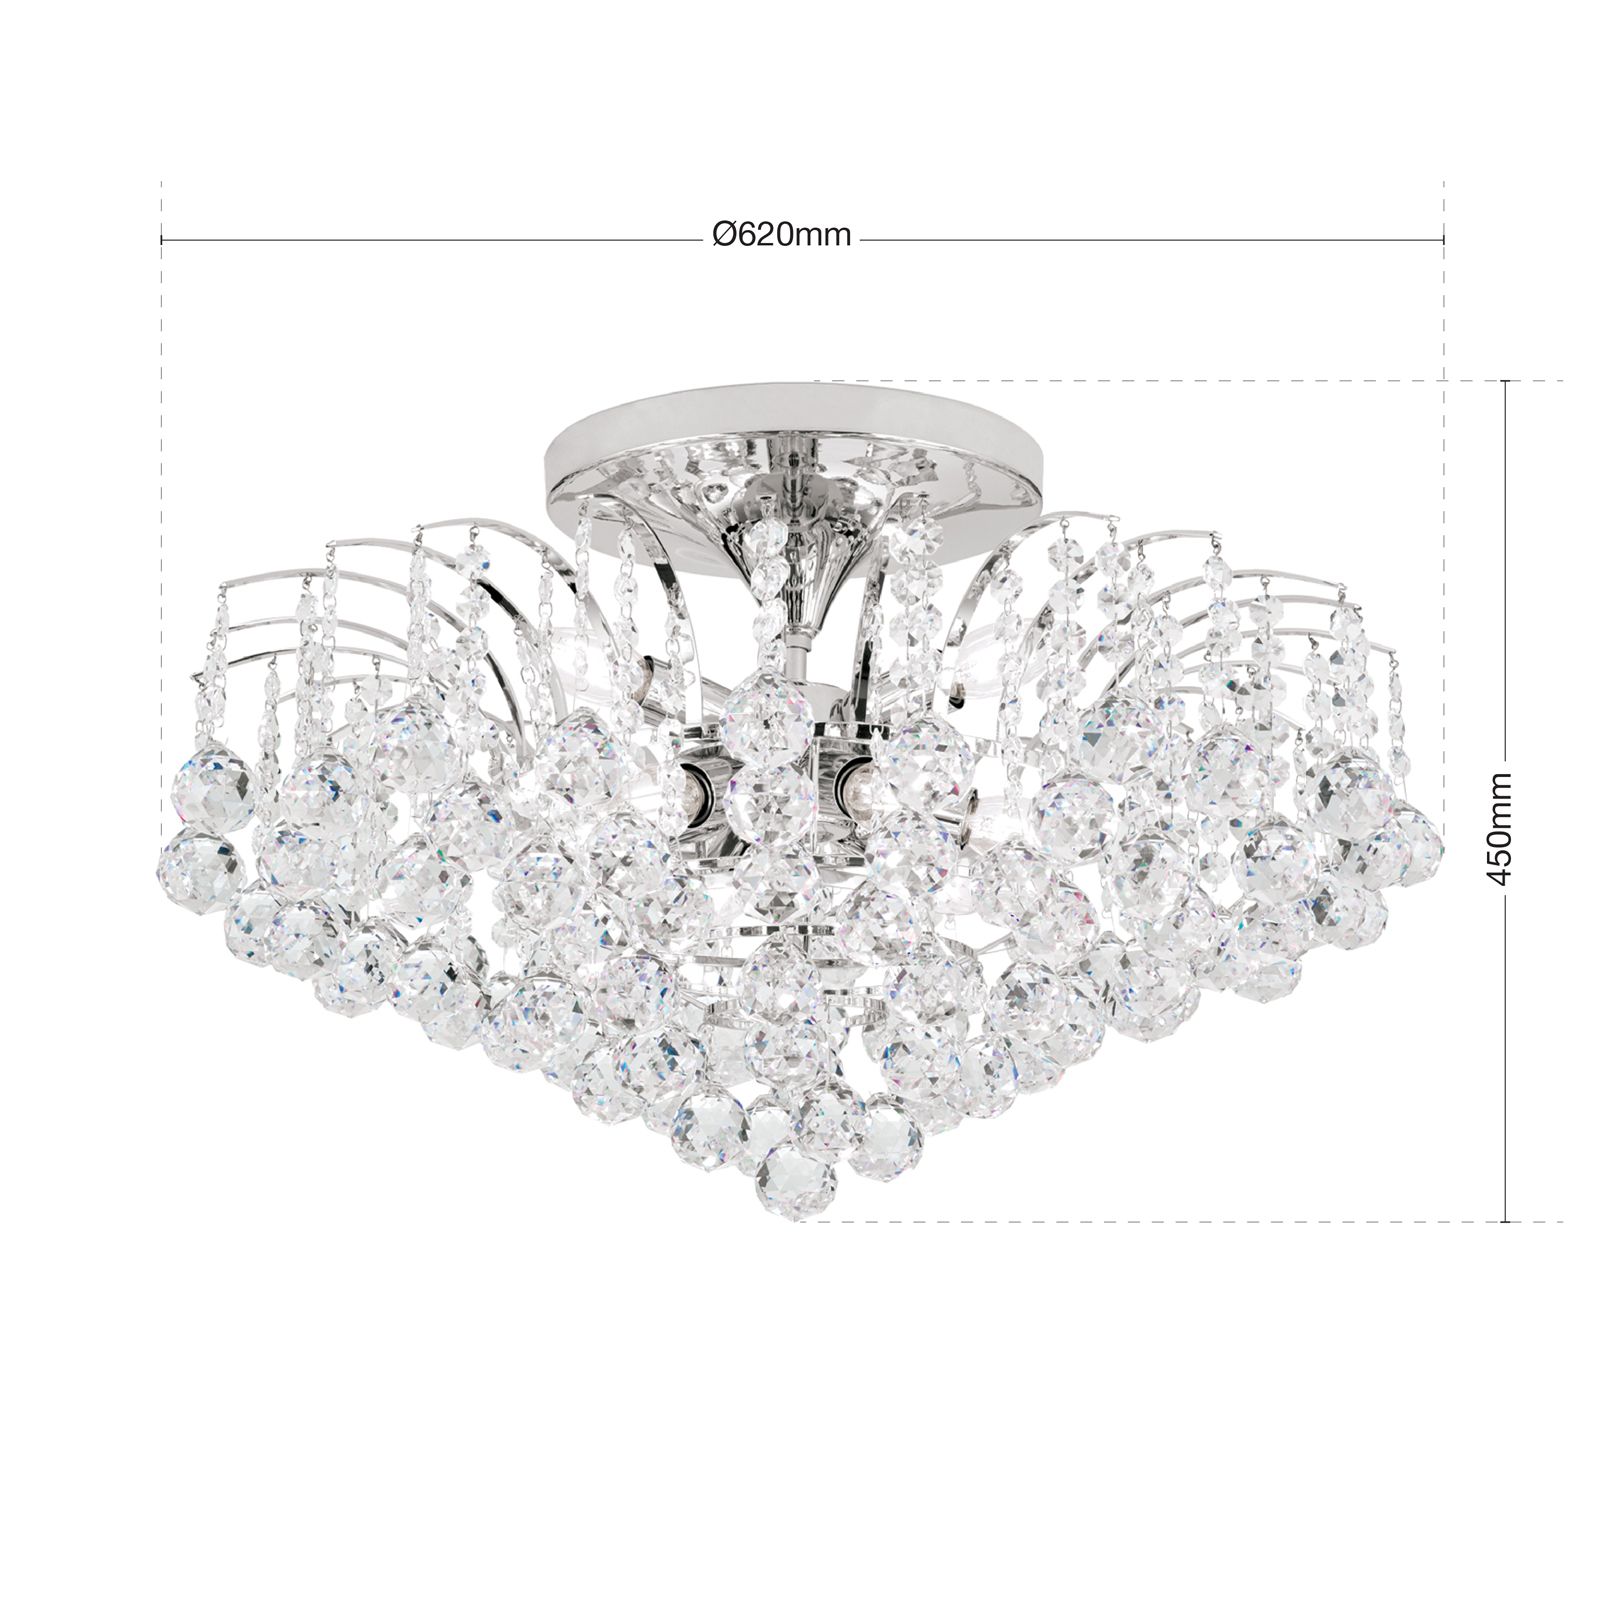 lamps, plated, crystal clear ceiling 9 light, KLASSISCH KRISTALL chrome